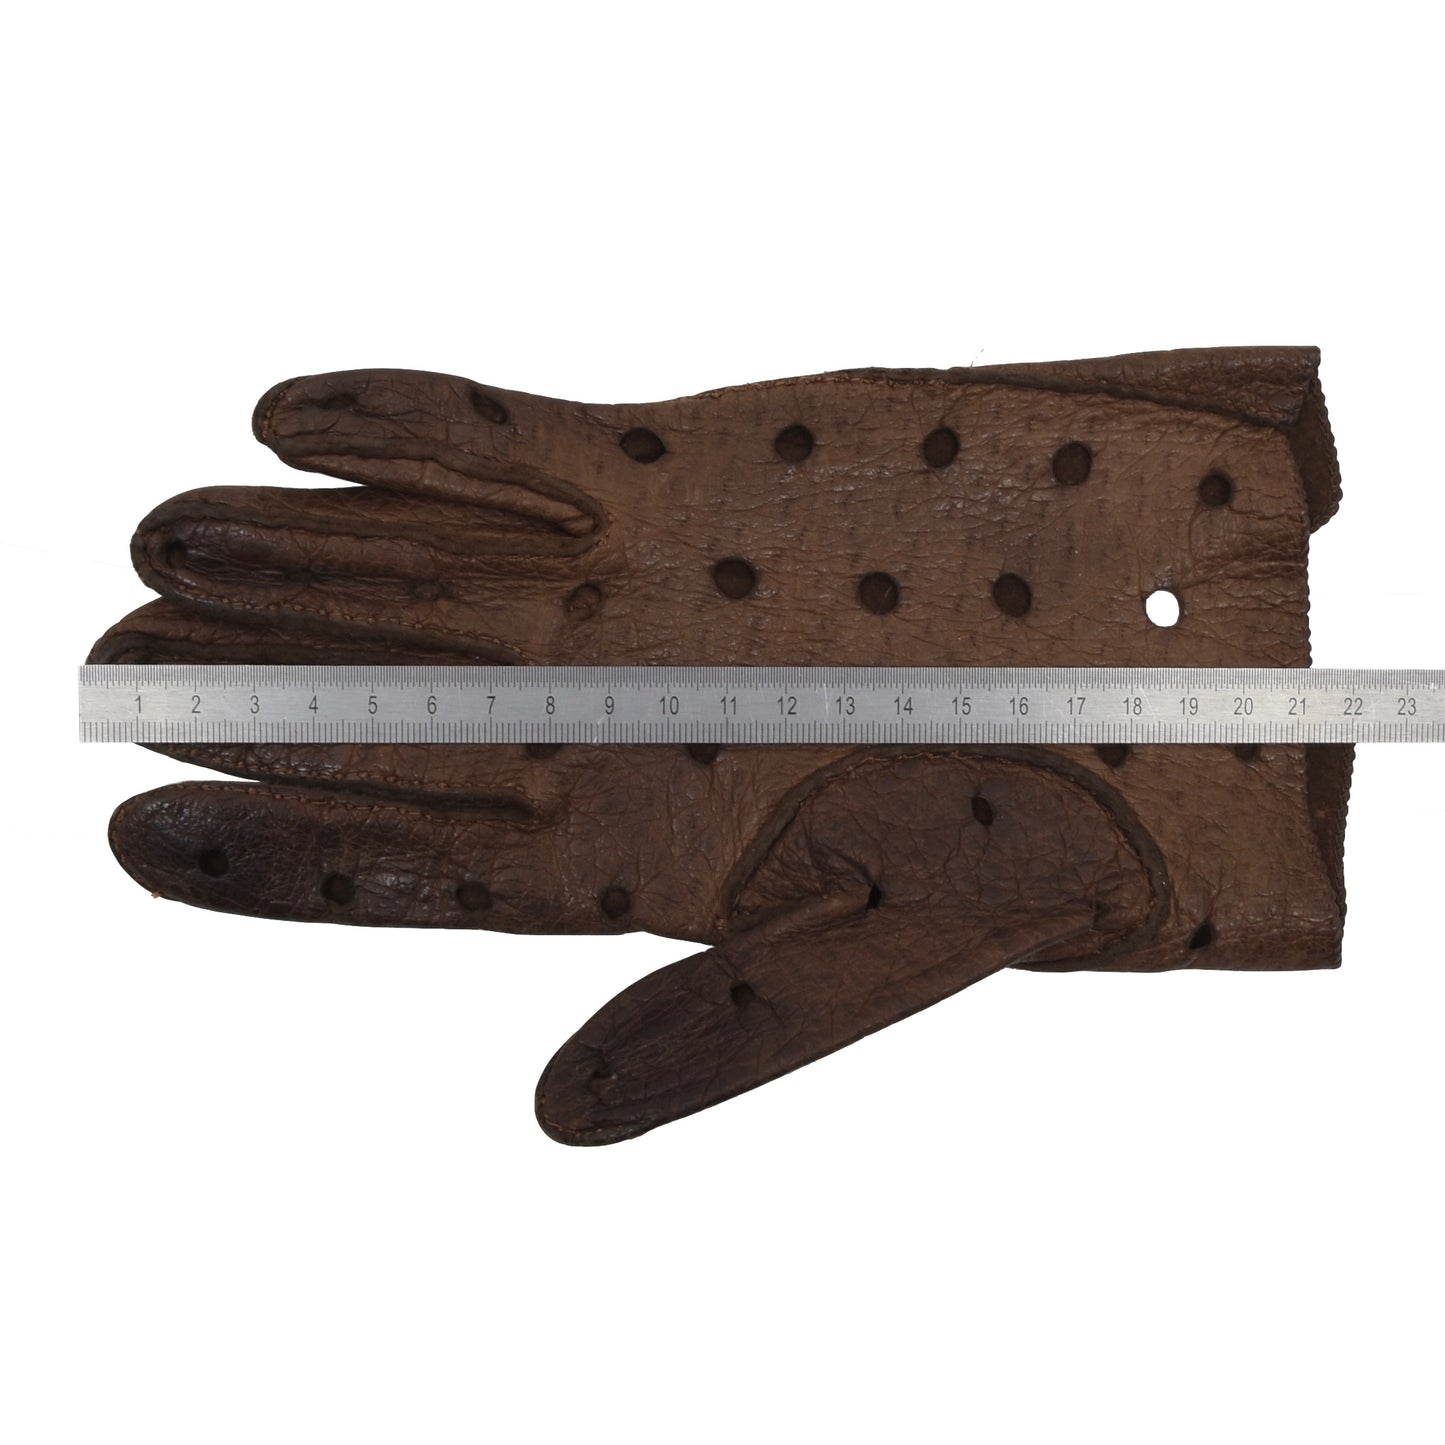 Unlined Peccary Driving Gloves Size 8.5 - Brown